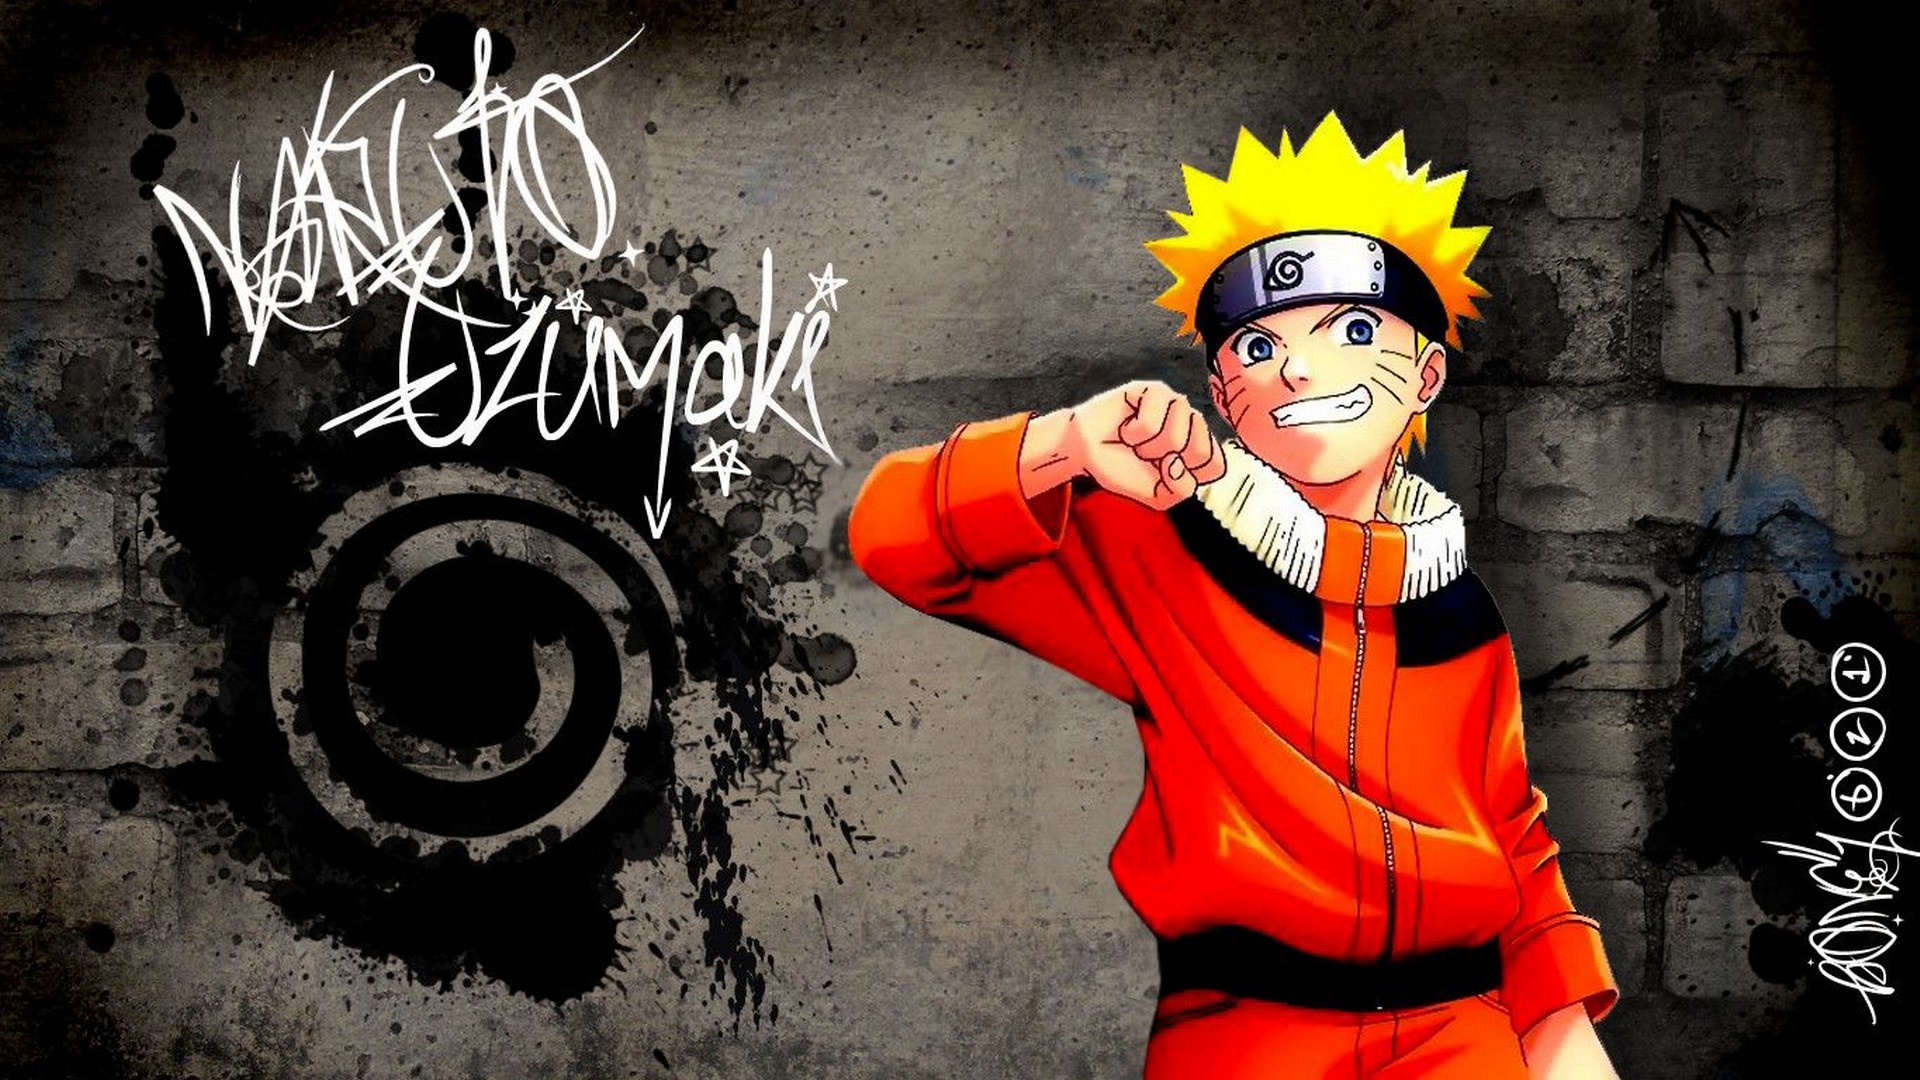 Wallpapers HD Naruto with high-resolution 1920x1080 pixel. You can use this poster wallpaper for your Desktop Computers, Mac Screensavers, Windows Backgrounds, iPhone Wallpapers, Tablet or Android Lock screen and another Mobile device